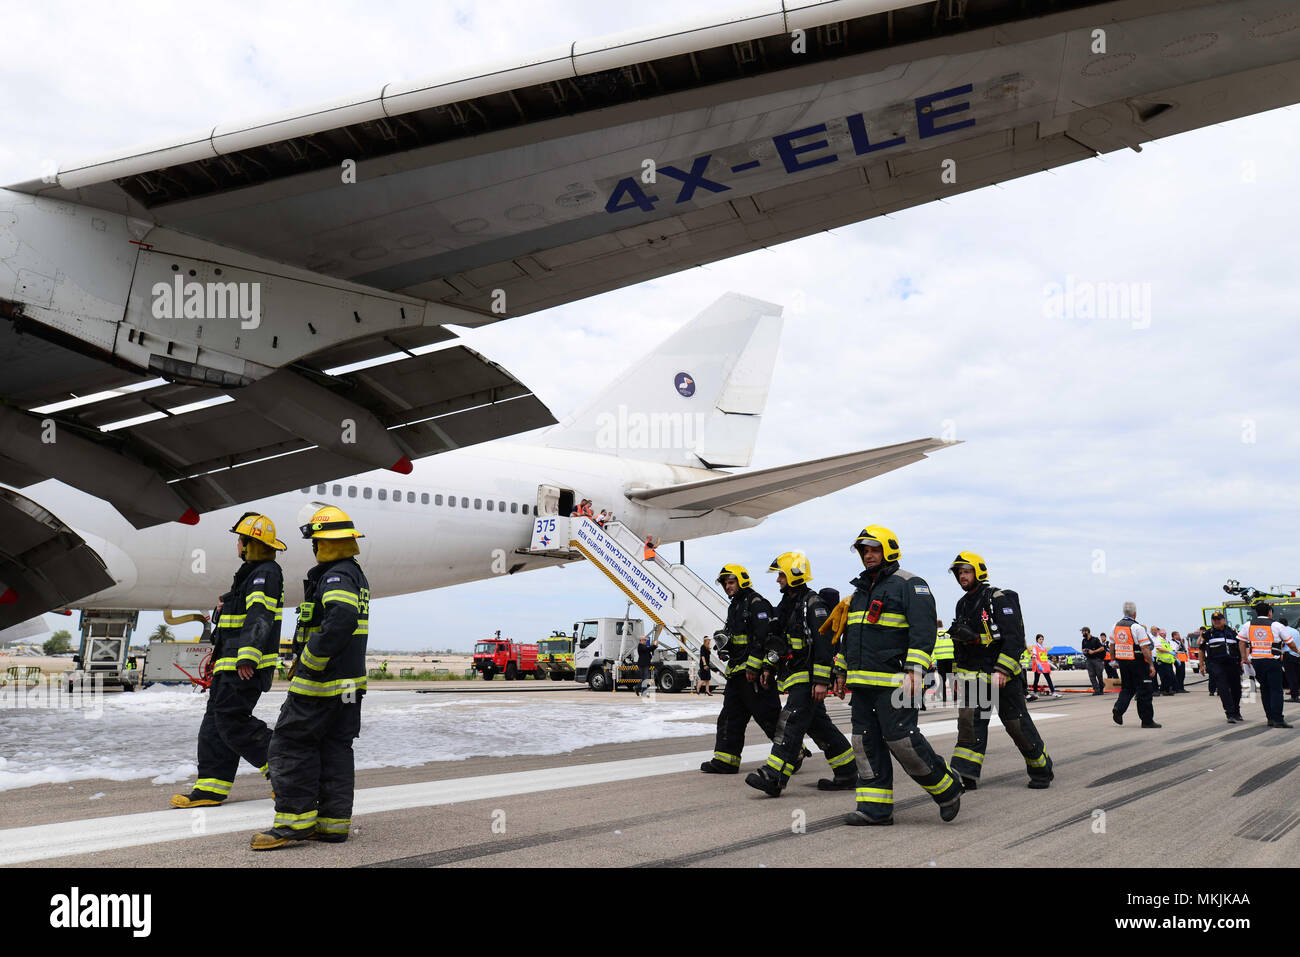 Tel Aviv, Israel. 8th May, 2018. People take part in the 'Pelican' emergency drill at Ben Gurion International Airport near Tel Aviv, Israel, on May 8, 2018. Ben Gurion International Airport carried out on Tuesday a large scale emergency drill simulating an emergency landing by a Boeing 747-400 jumbo jet carrying hundreds of passengers. Around 1,000 representatives of the airport, the defense and health ministries, the air force, police, emergency services and the IDF Home Front Command took part in the drill. Credit: Tomer Neuberg-JINI/Xinhua/Alamy Live News Stock Photo